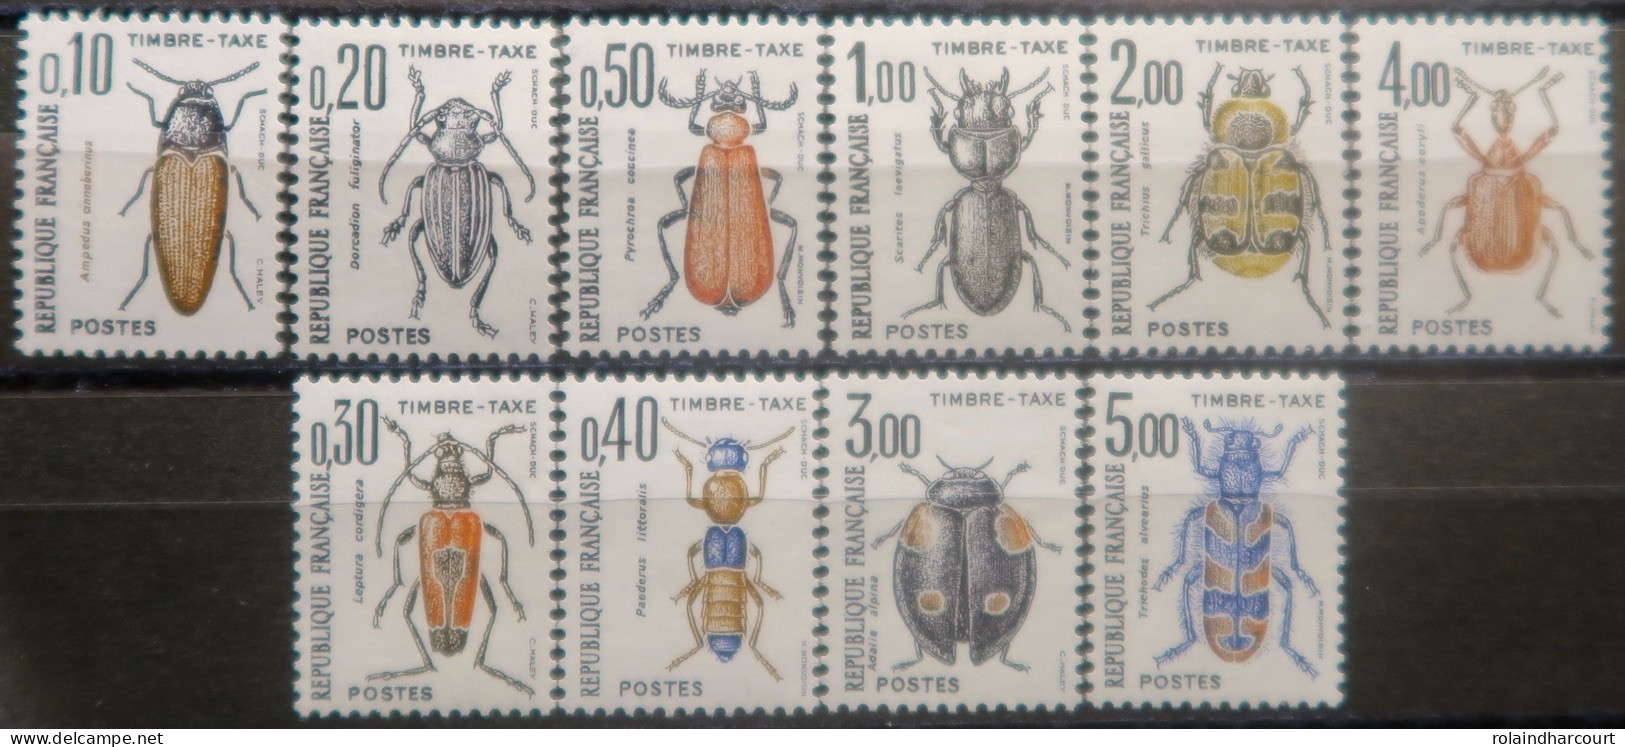 LP3969/379 - 1982/1993 - TIMBRES TAXE - INSECTES - SERIE COMPLETE - N°103 à 112 NEUFS** - 1960-.... Postfris